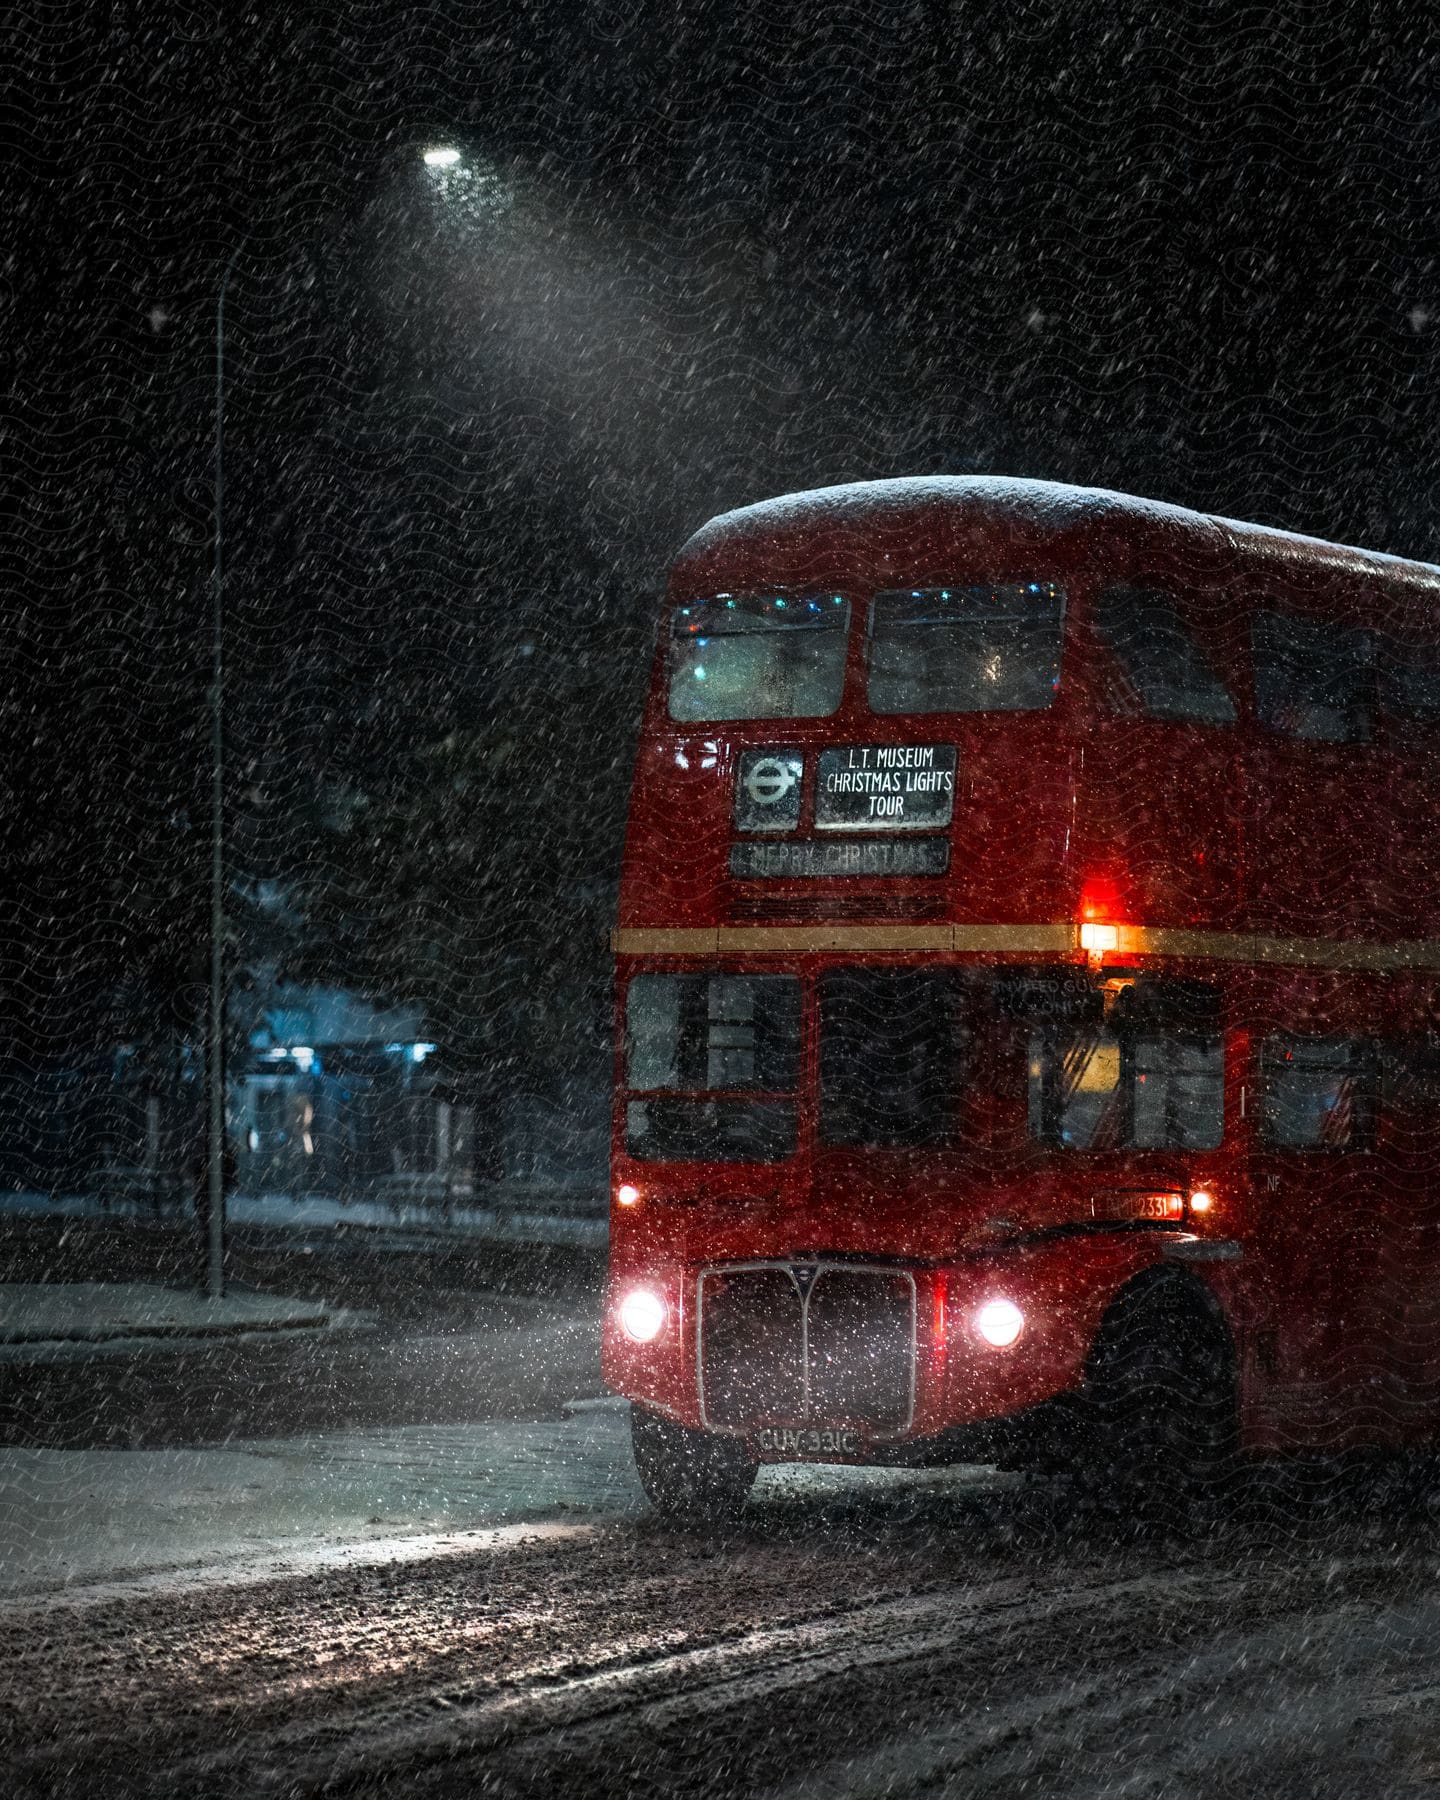 Front of a red public bus on the street on a snowy night